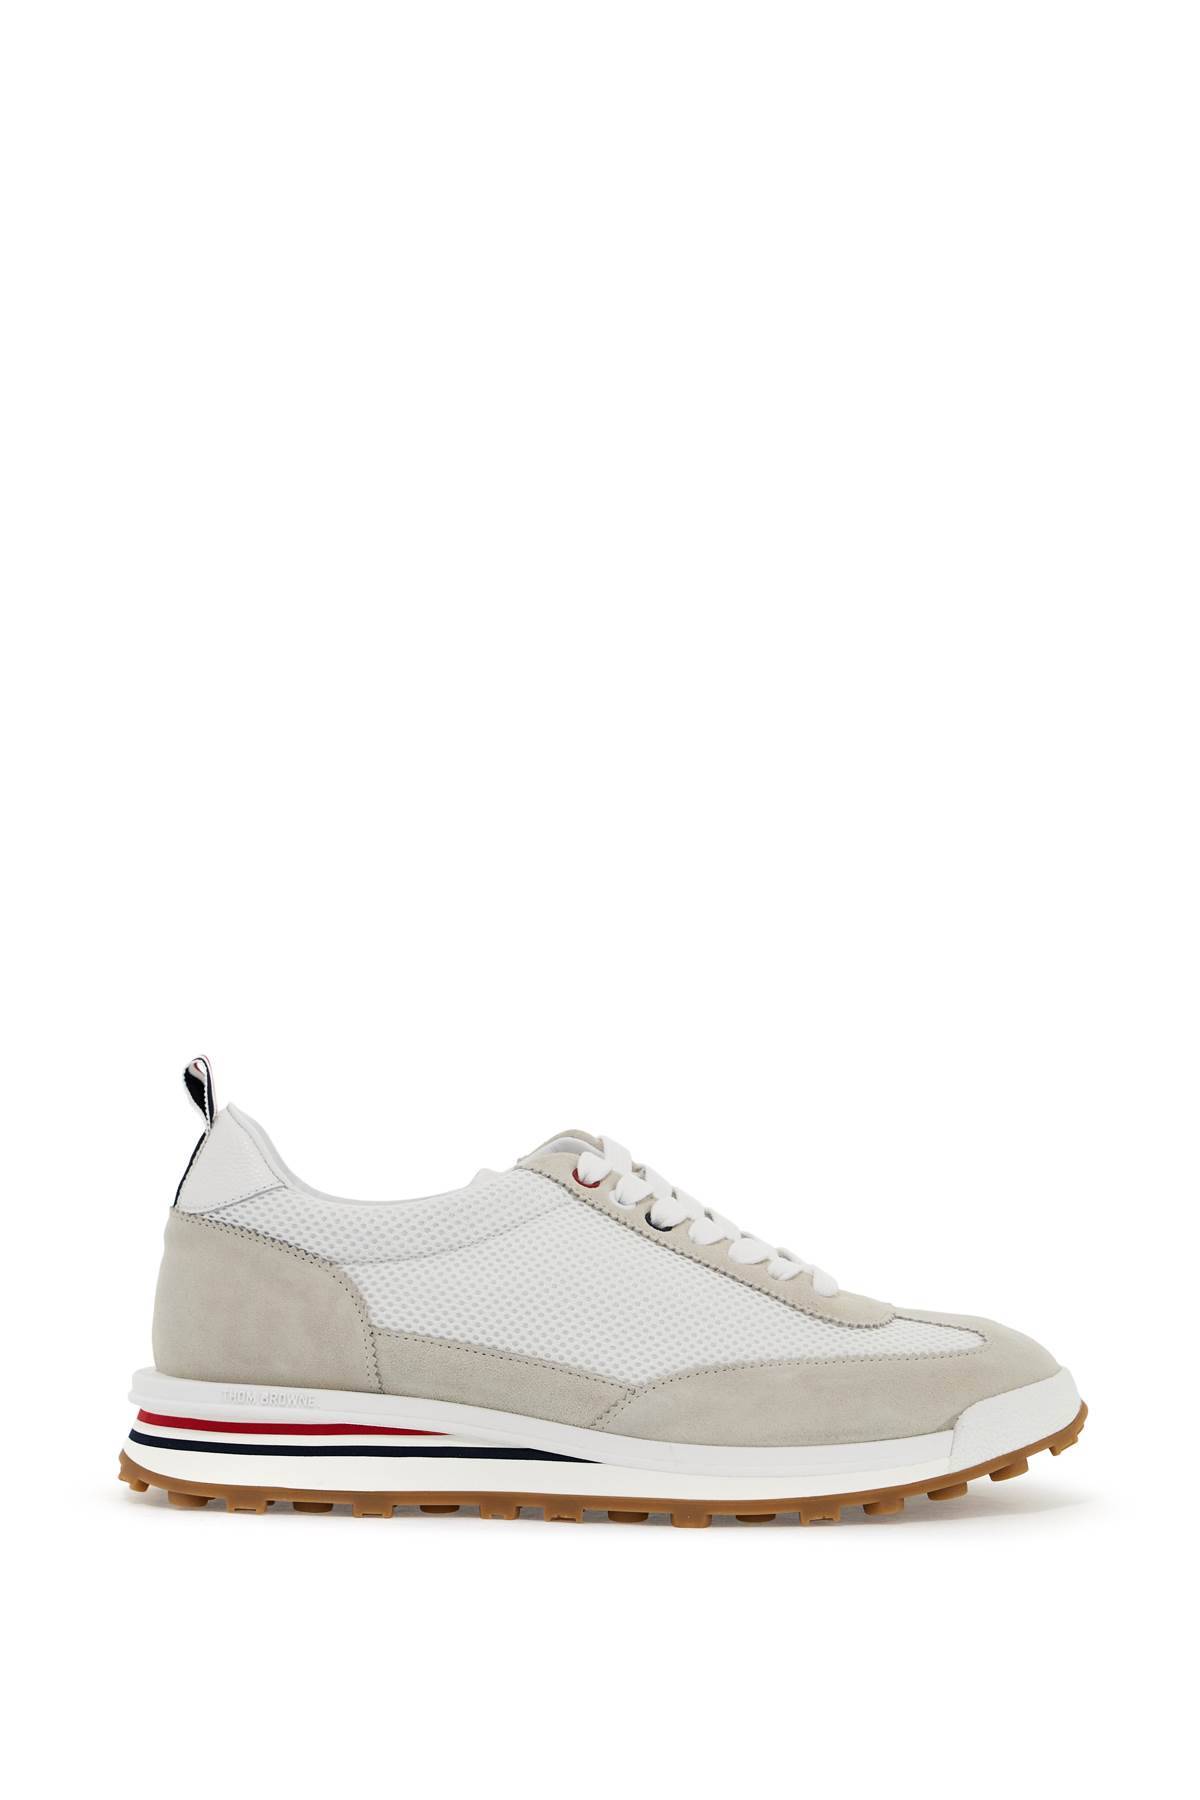 Thom Browne THOM BROWNE mesh and suede leather sneakers in 9